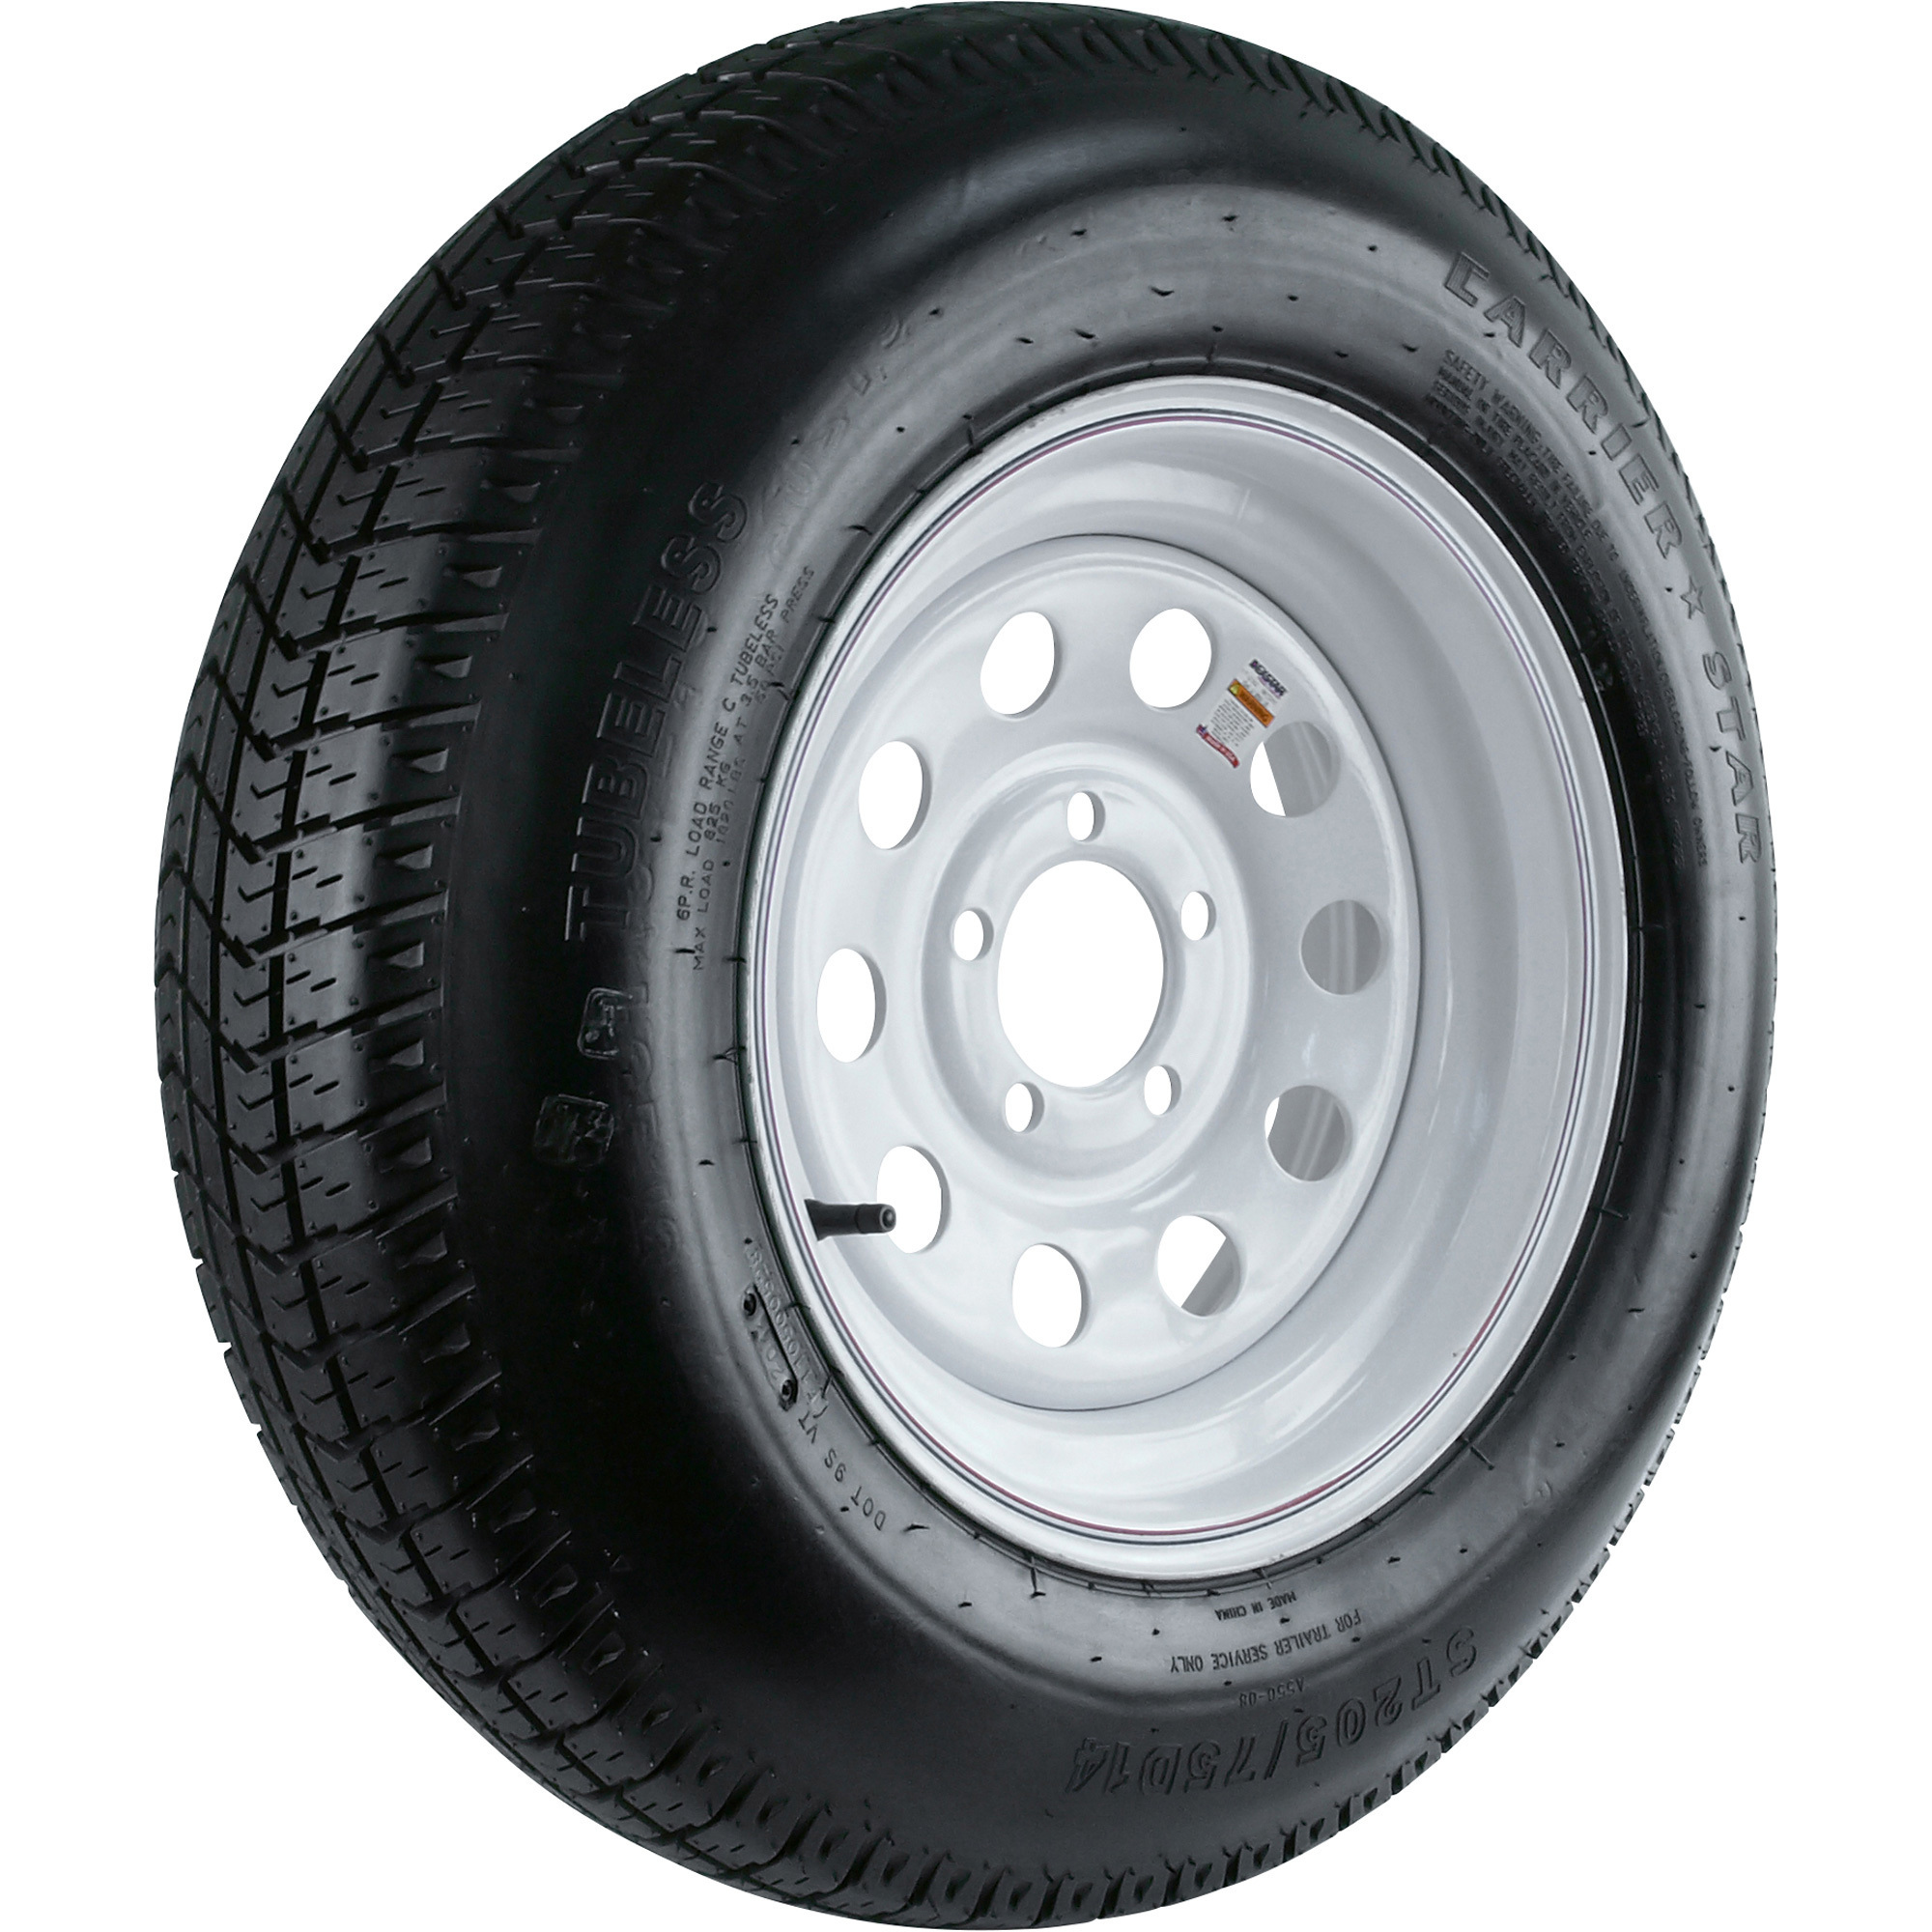 Martin Wheel Carrier Star 14Inch Bias-Ply Trailer Tire and Wheel Assembly â ST205/75D-14, 5-Hole, Load Range C, Model DM205D4C-5MMN